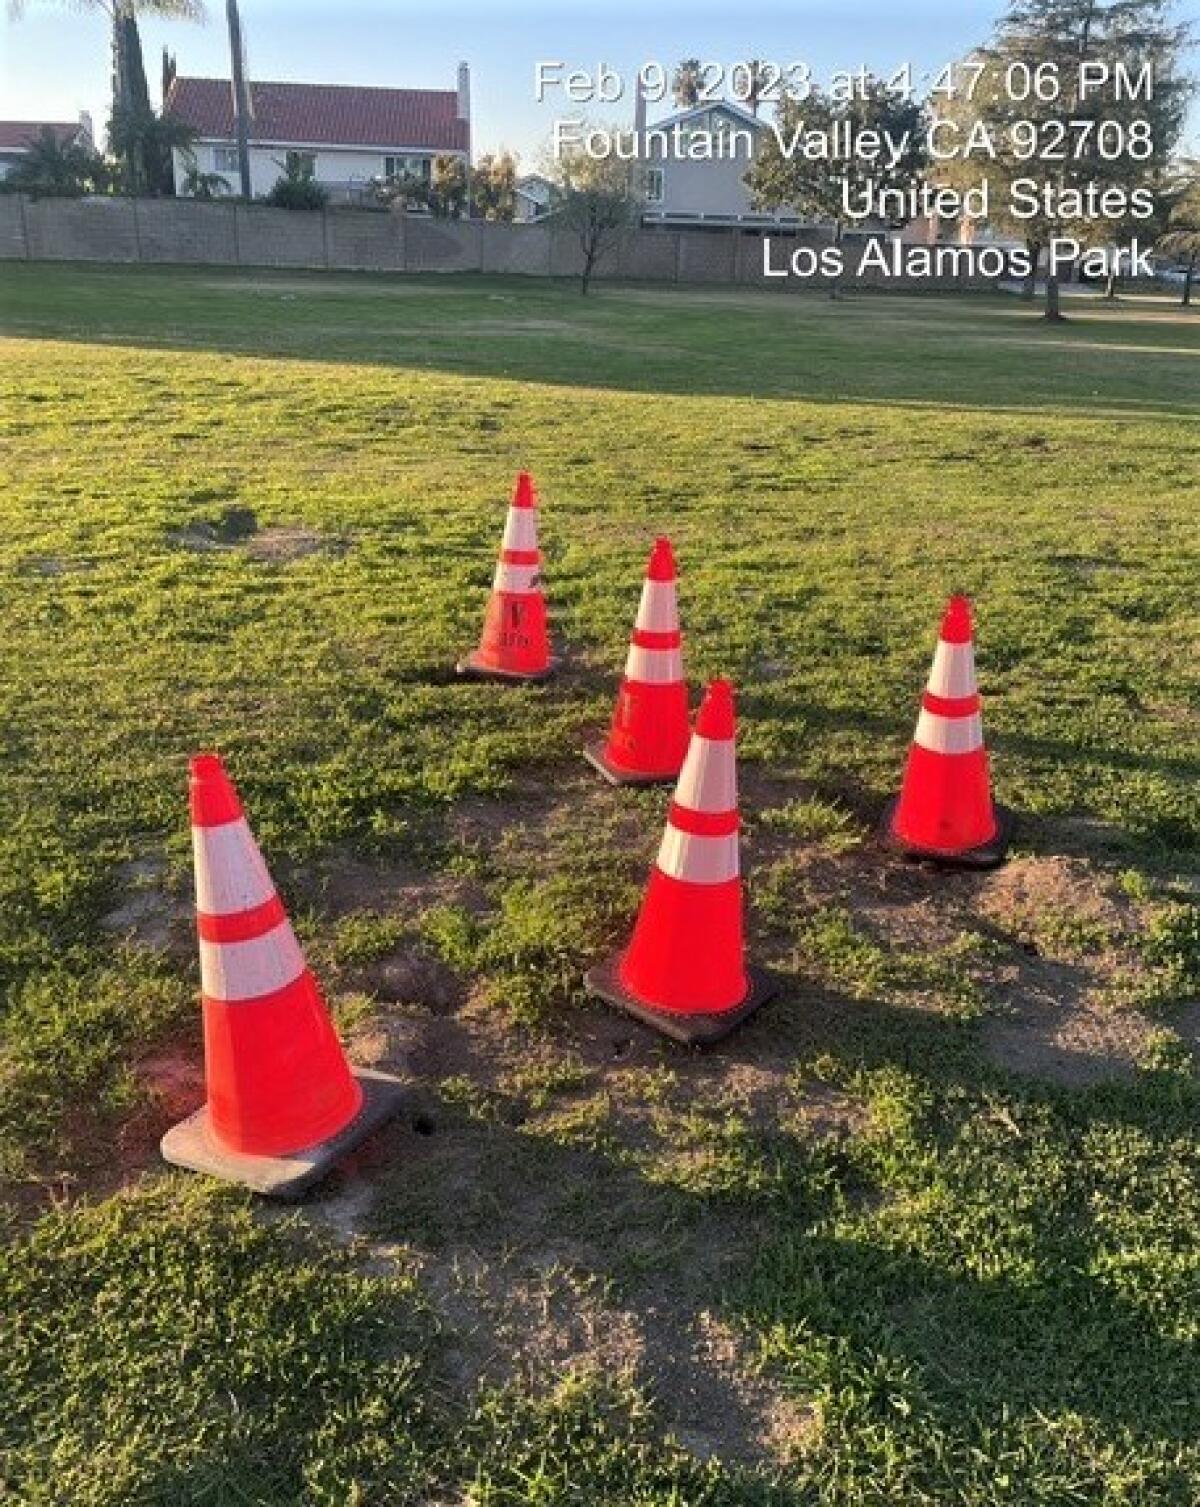 A photo taken by Fountain Valley's Public Works Department shows cones placed near gopher tunnels at Los Alamos Park.